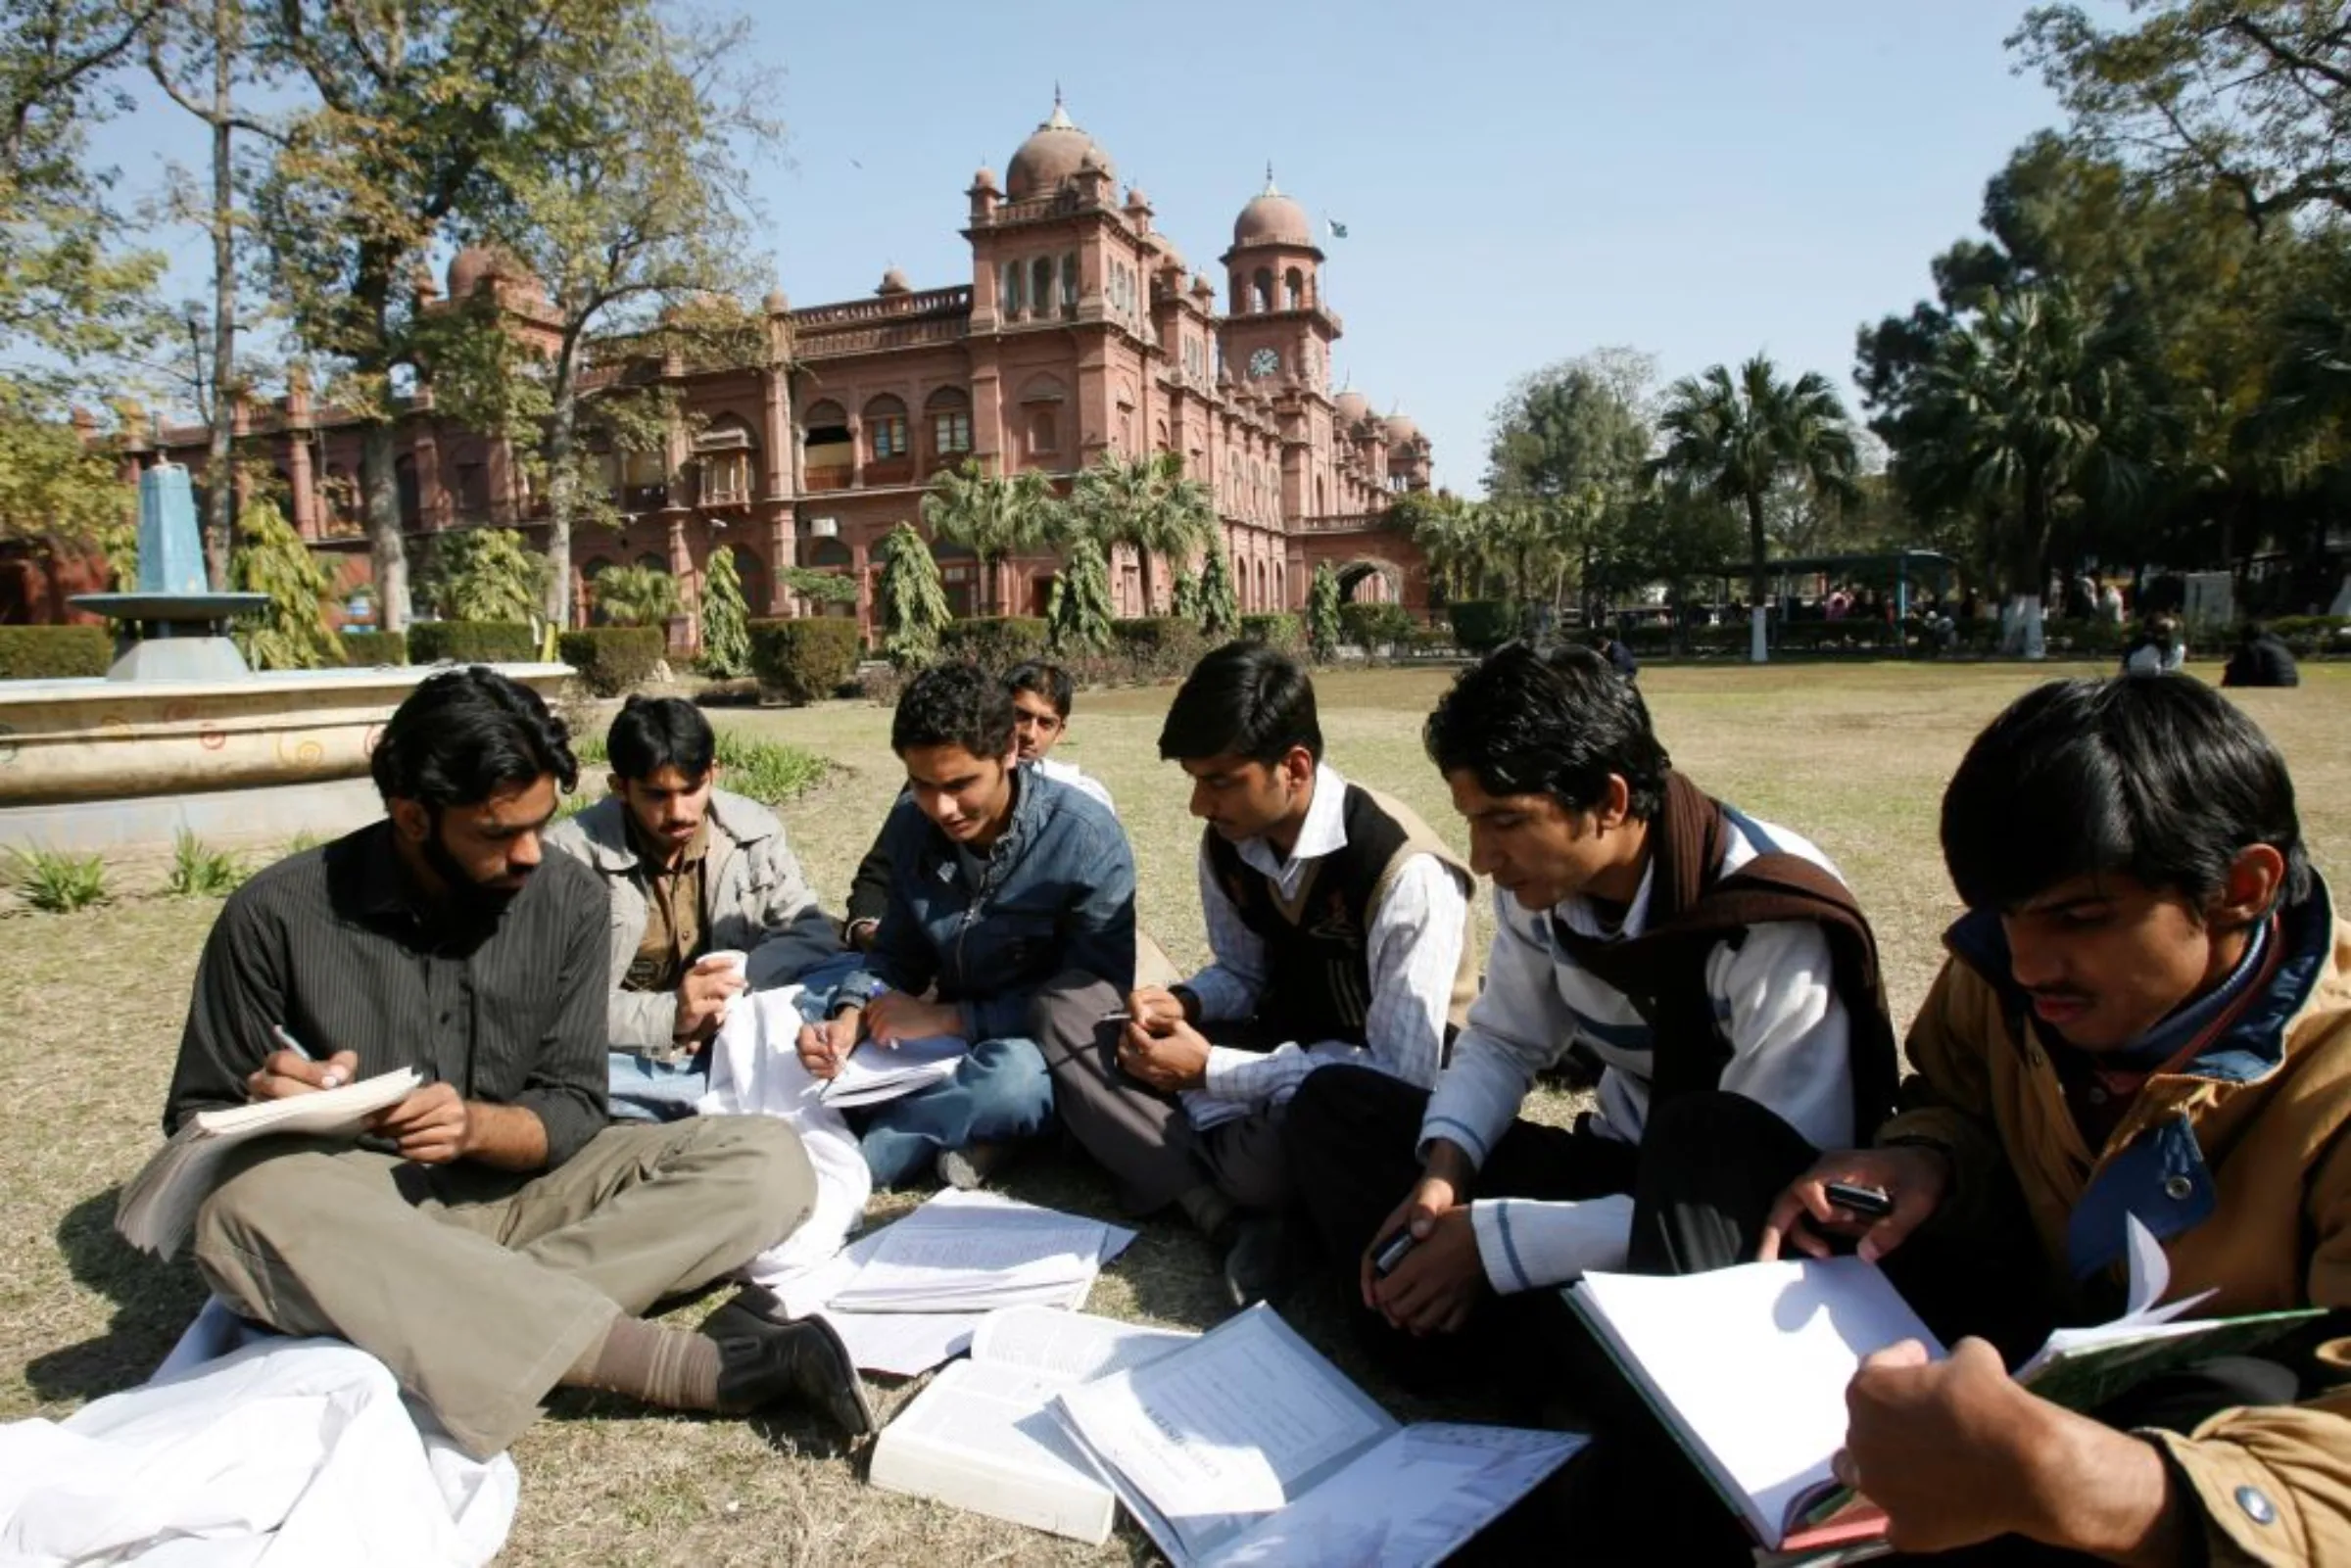 Students exchange their notes after attending a class at Pakistan's Punjab University in Lahore February 12, 2008